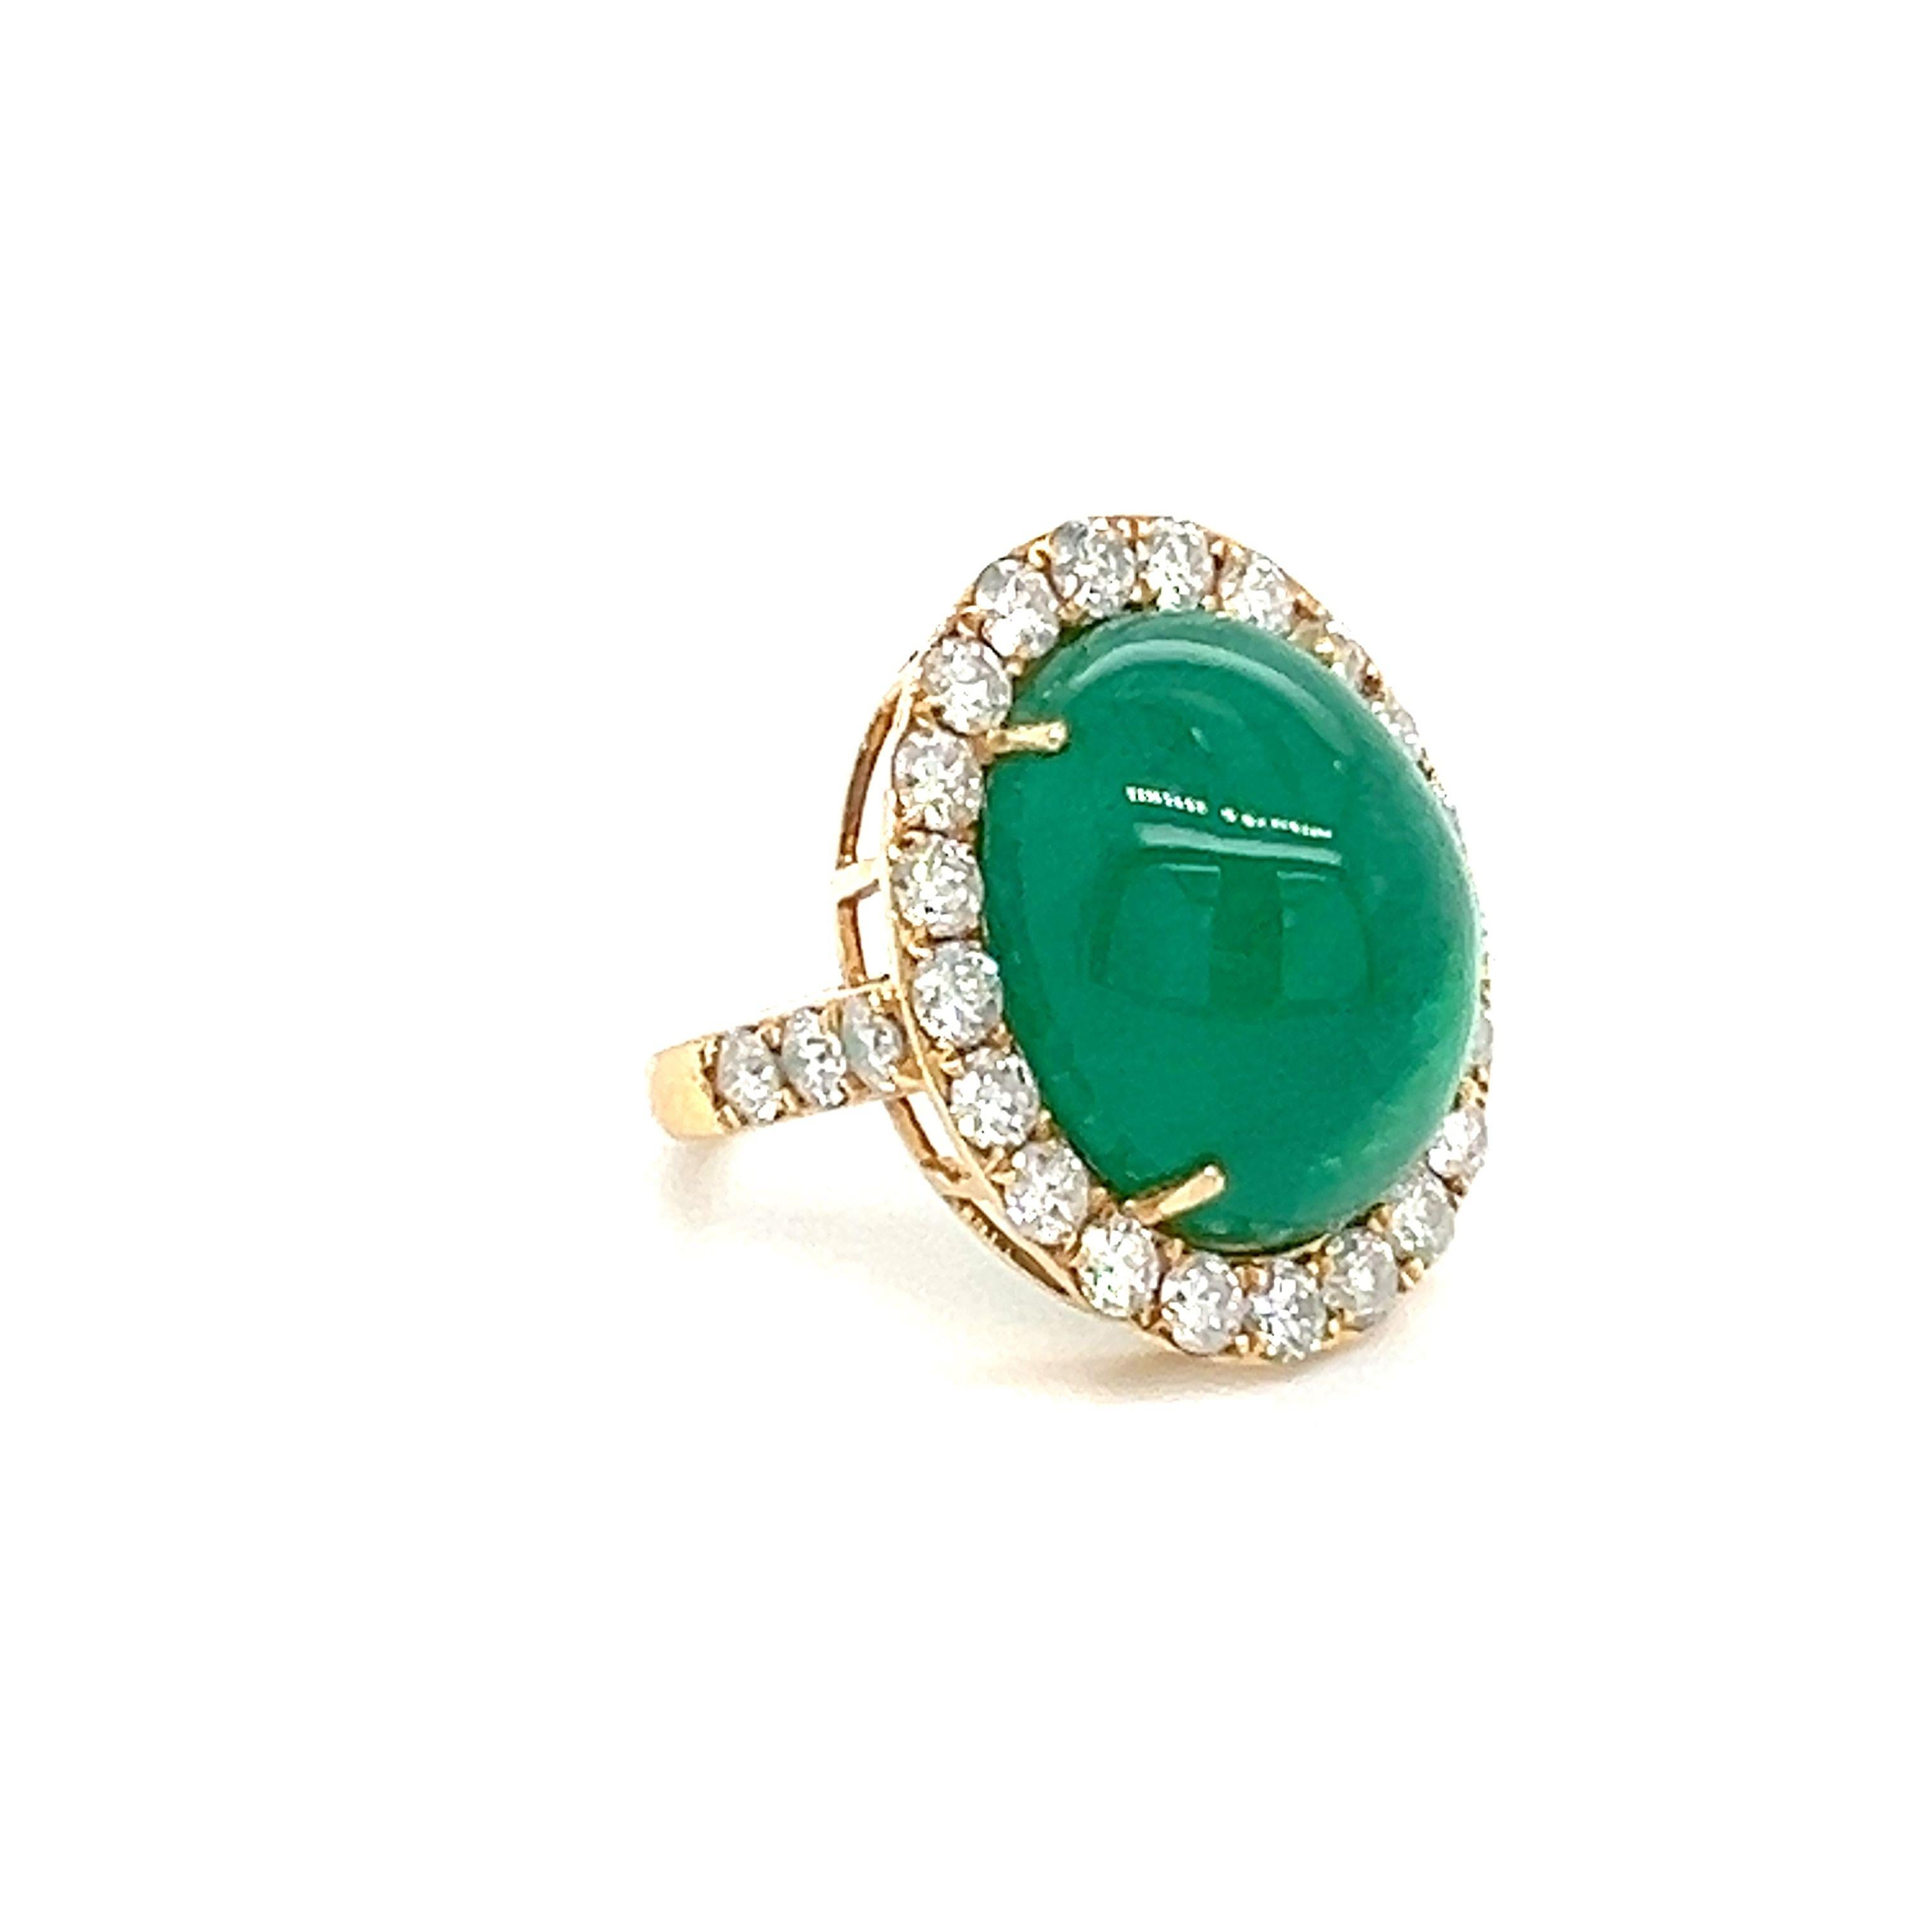 A stunning Natural Emerald Diamond ring set in 18-Kt yellow gold ring featuring with natural 18.99-carat emerald beautifully surrounded by 2.30-carat natural diamonds. 